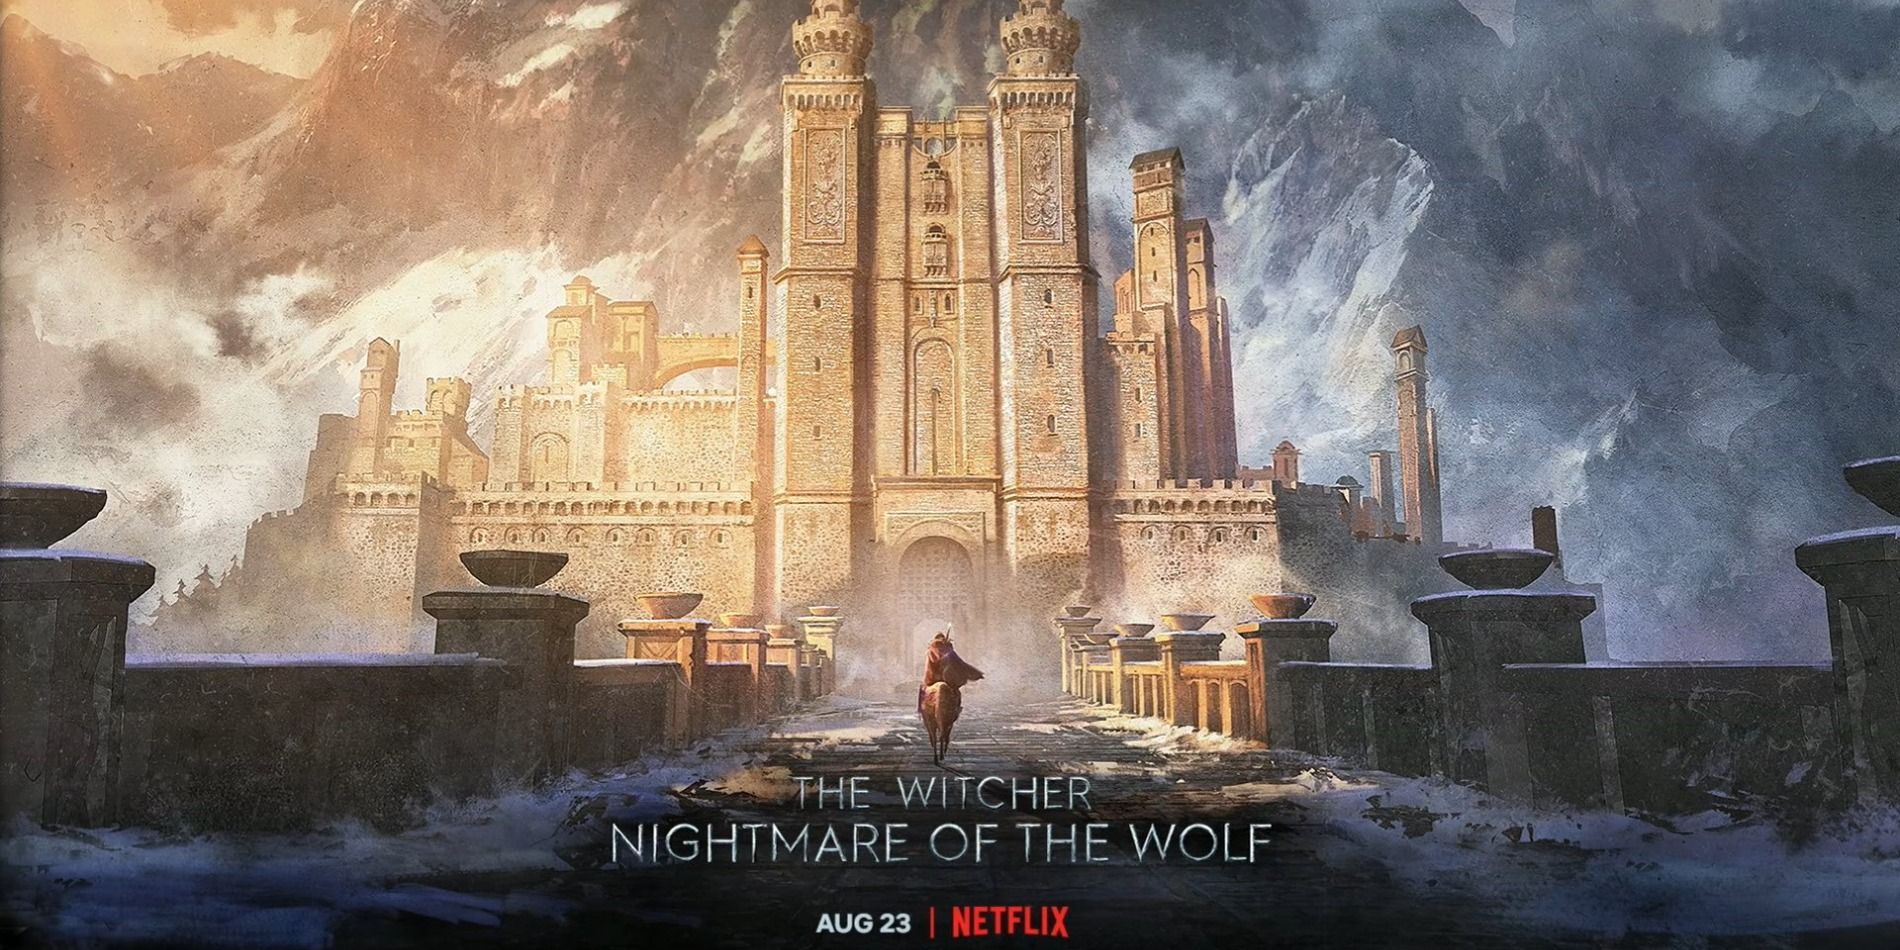 Art for the upcoming animated movie prequel The Witcher: Nightmare of the Wolf